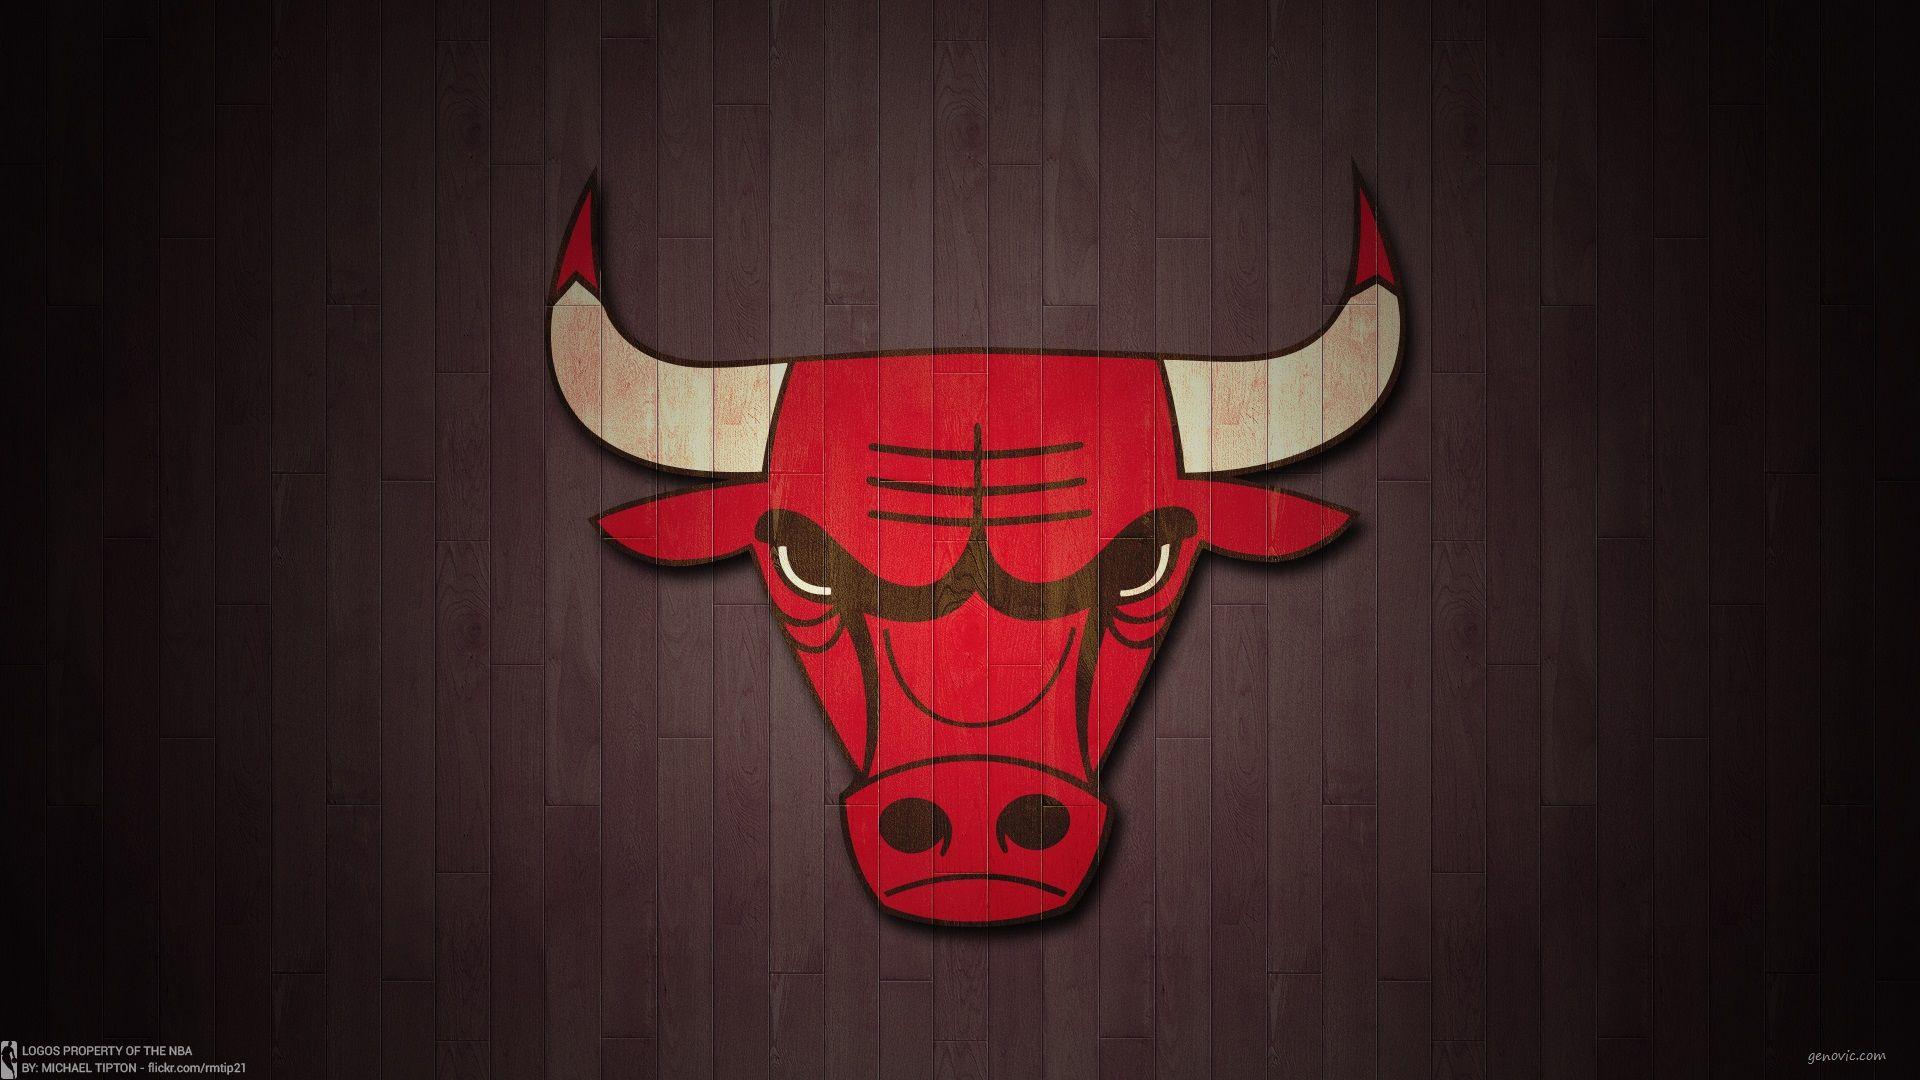 Chicago Bulls Logo Wallpapers HD for iPhone, Laptop, iPad, Mobile